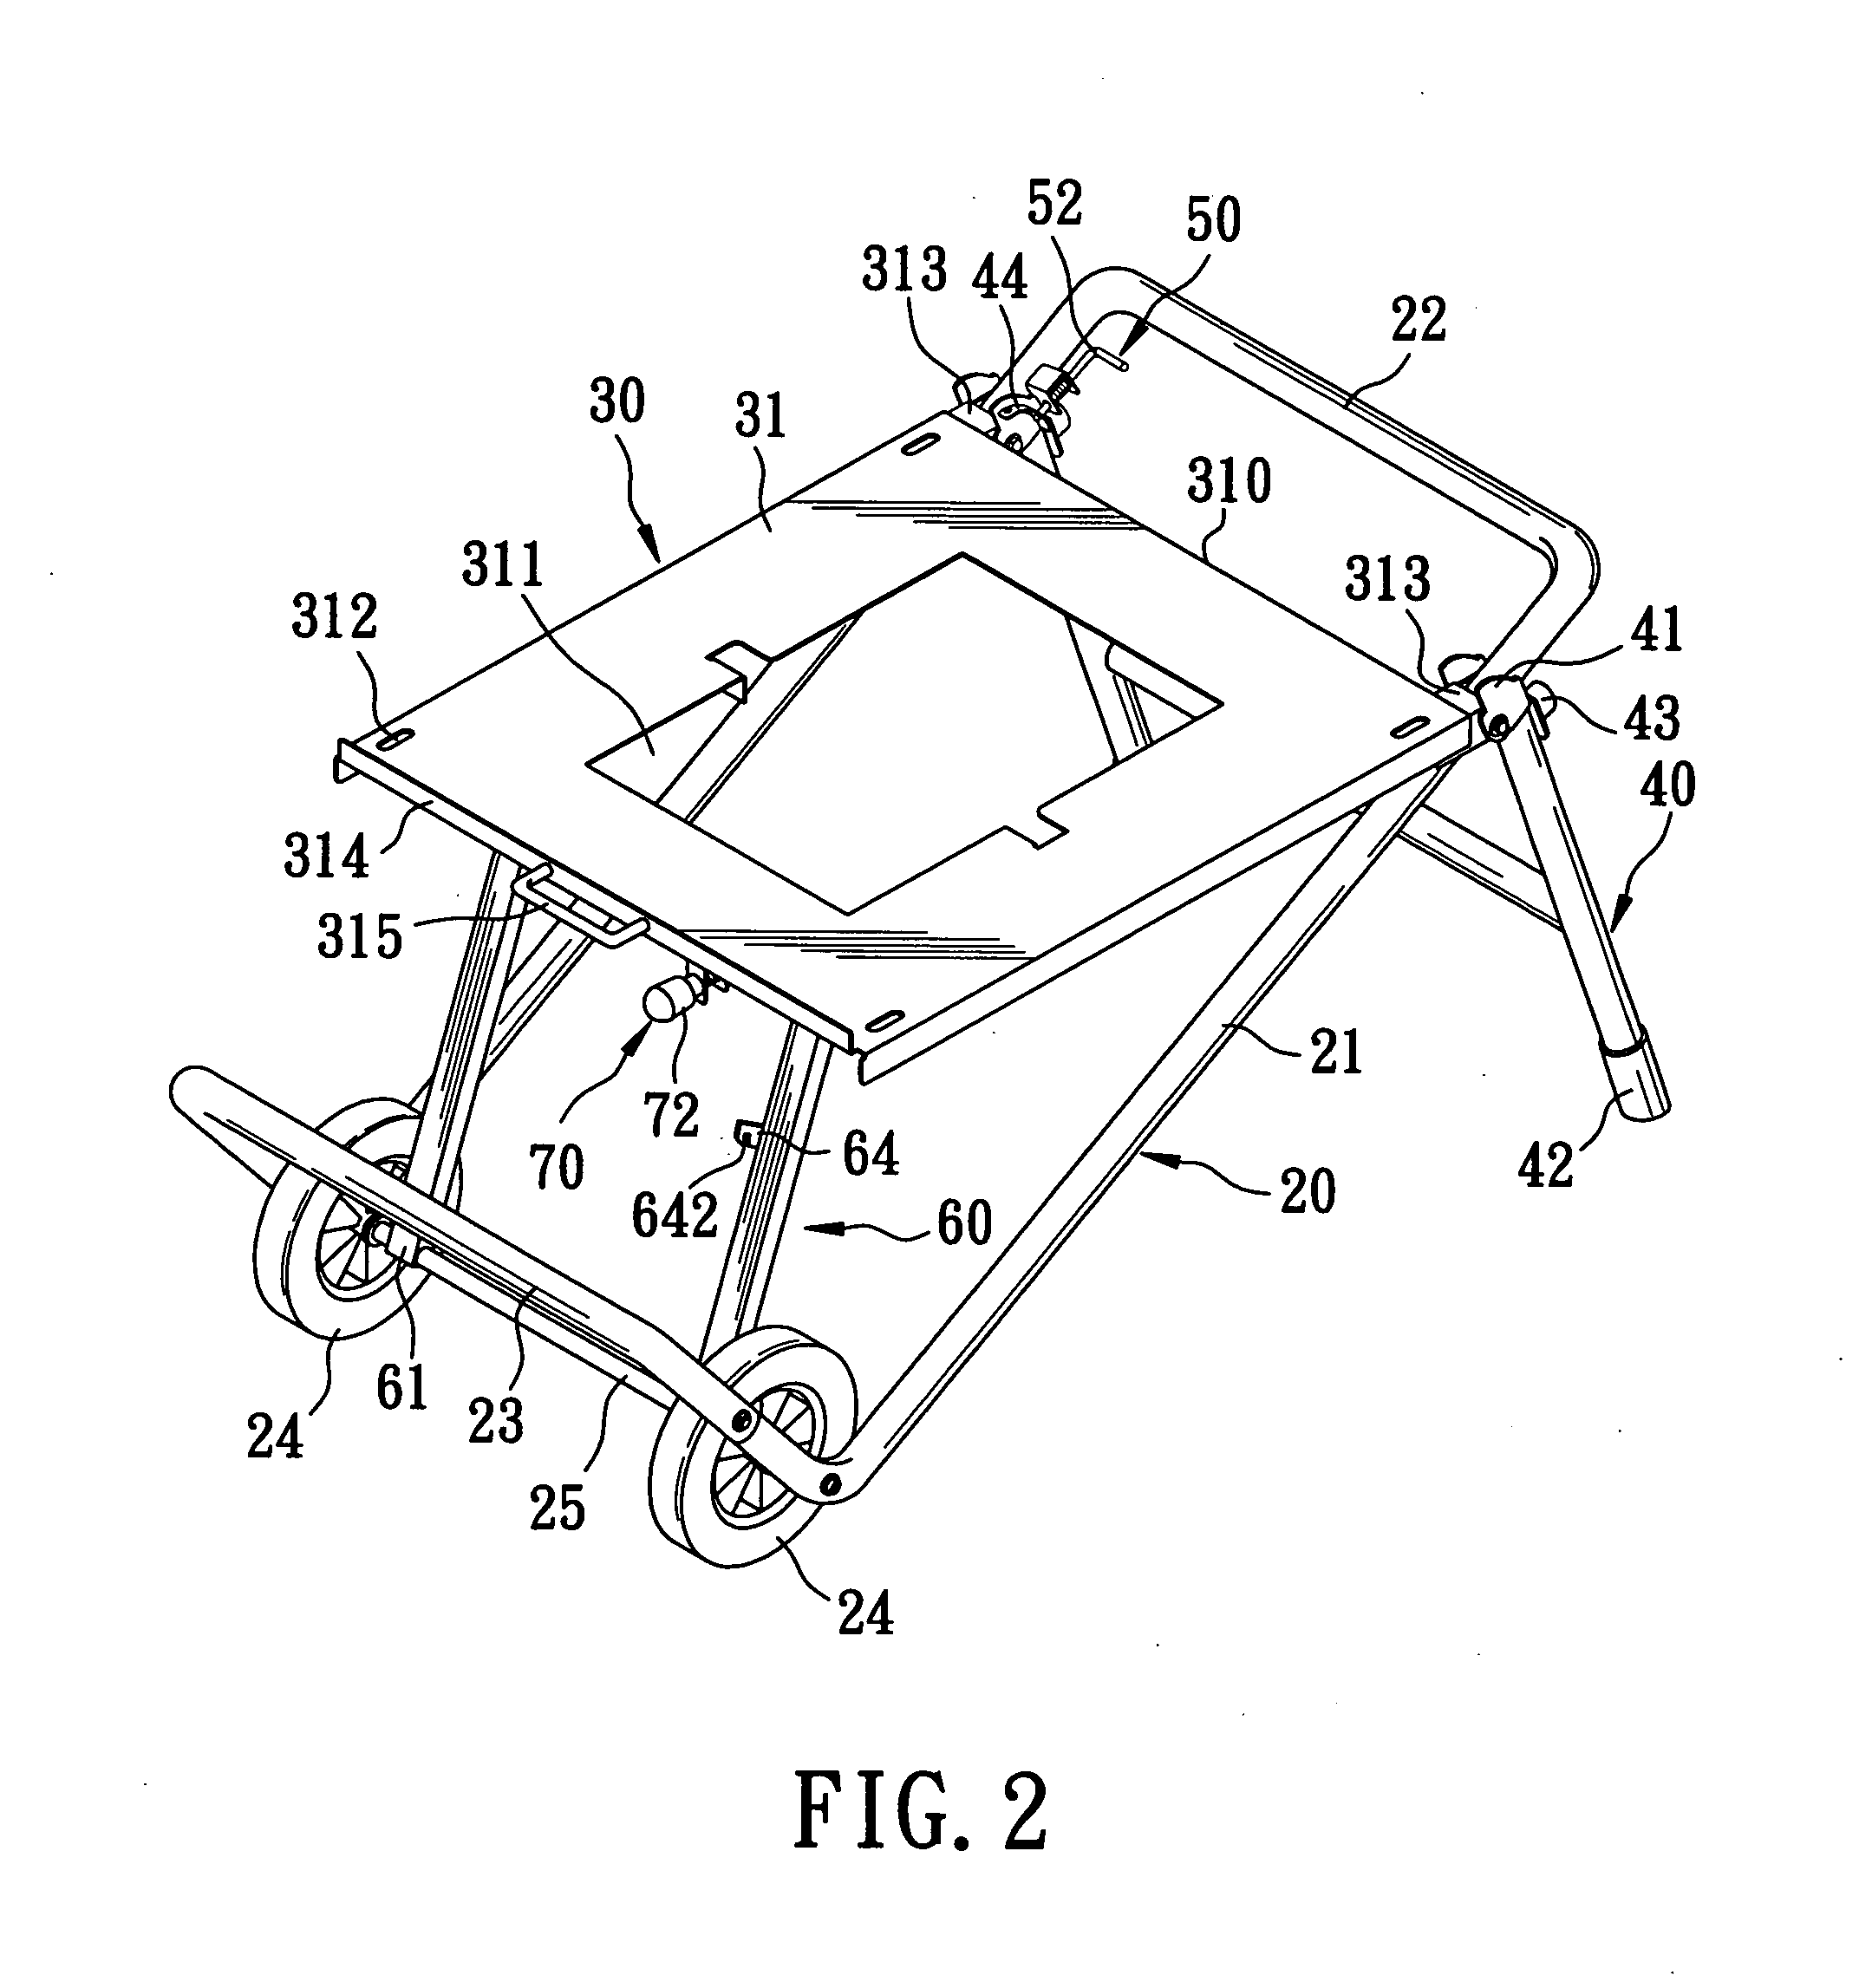 Foldable frame assembly for suspending a machine above a ground surface